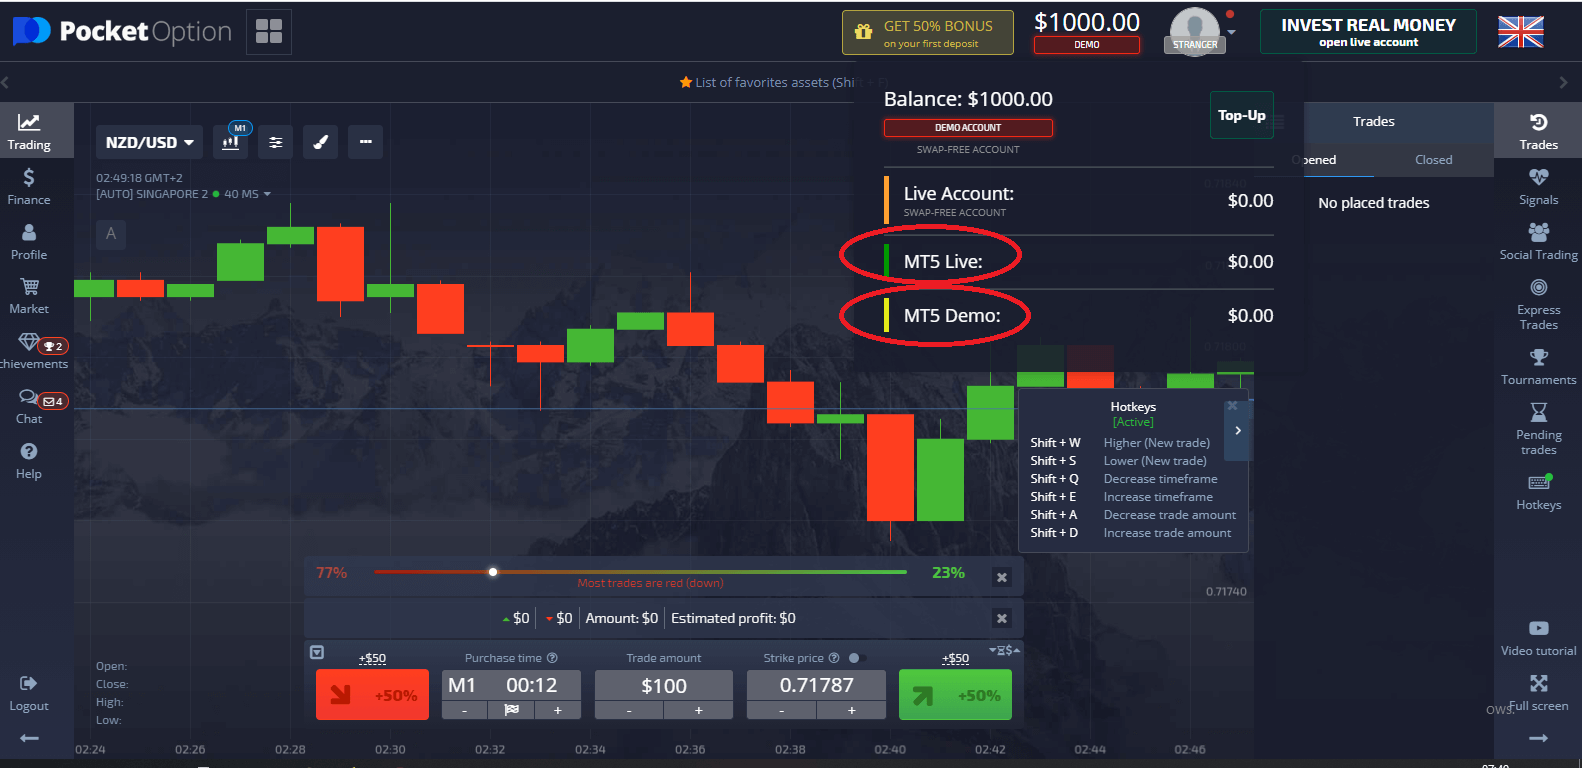 How to Register and Trade Forex at Pocket Option